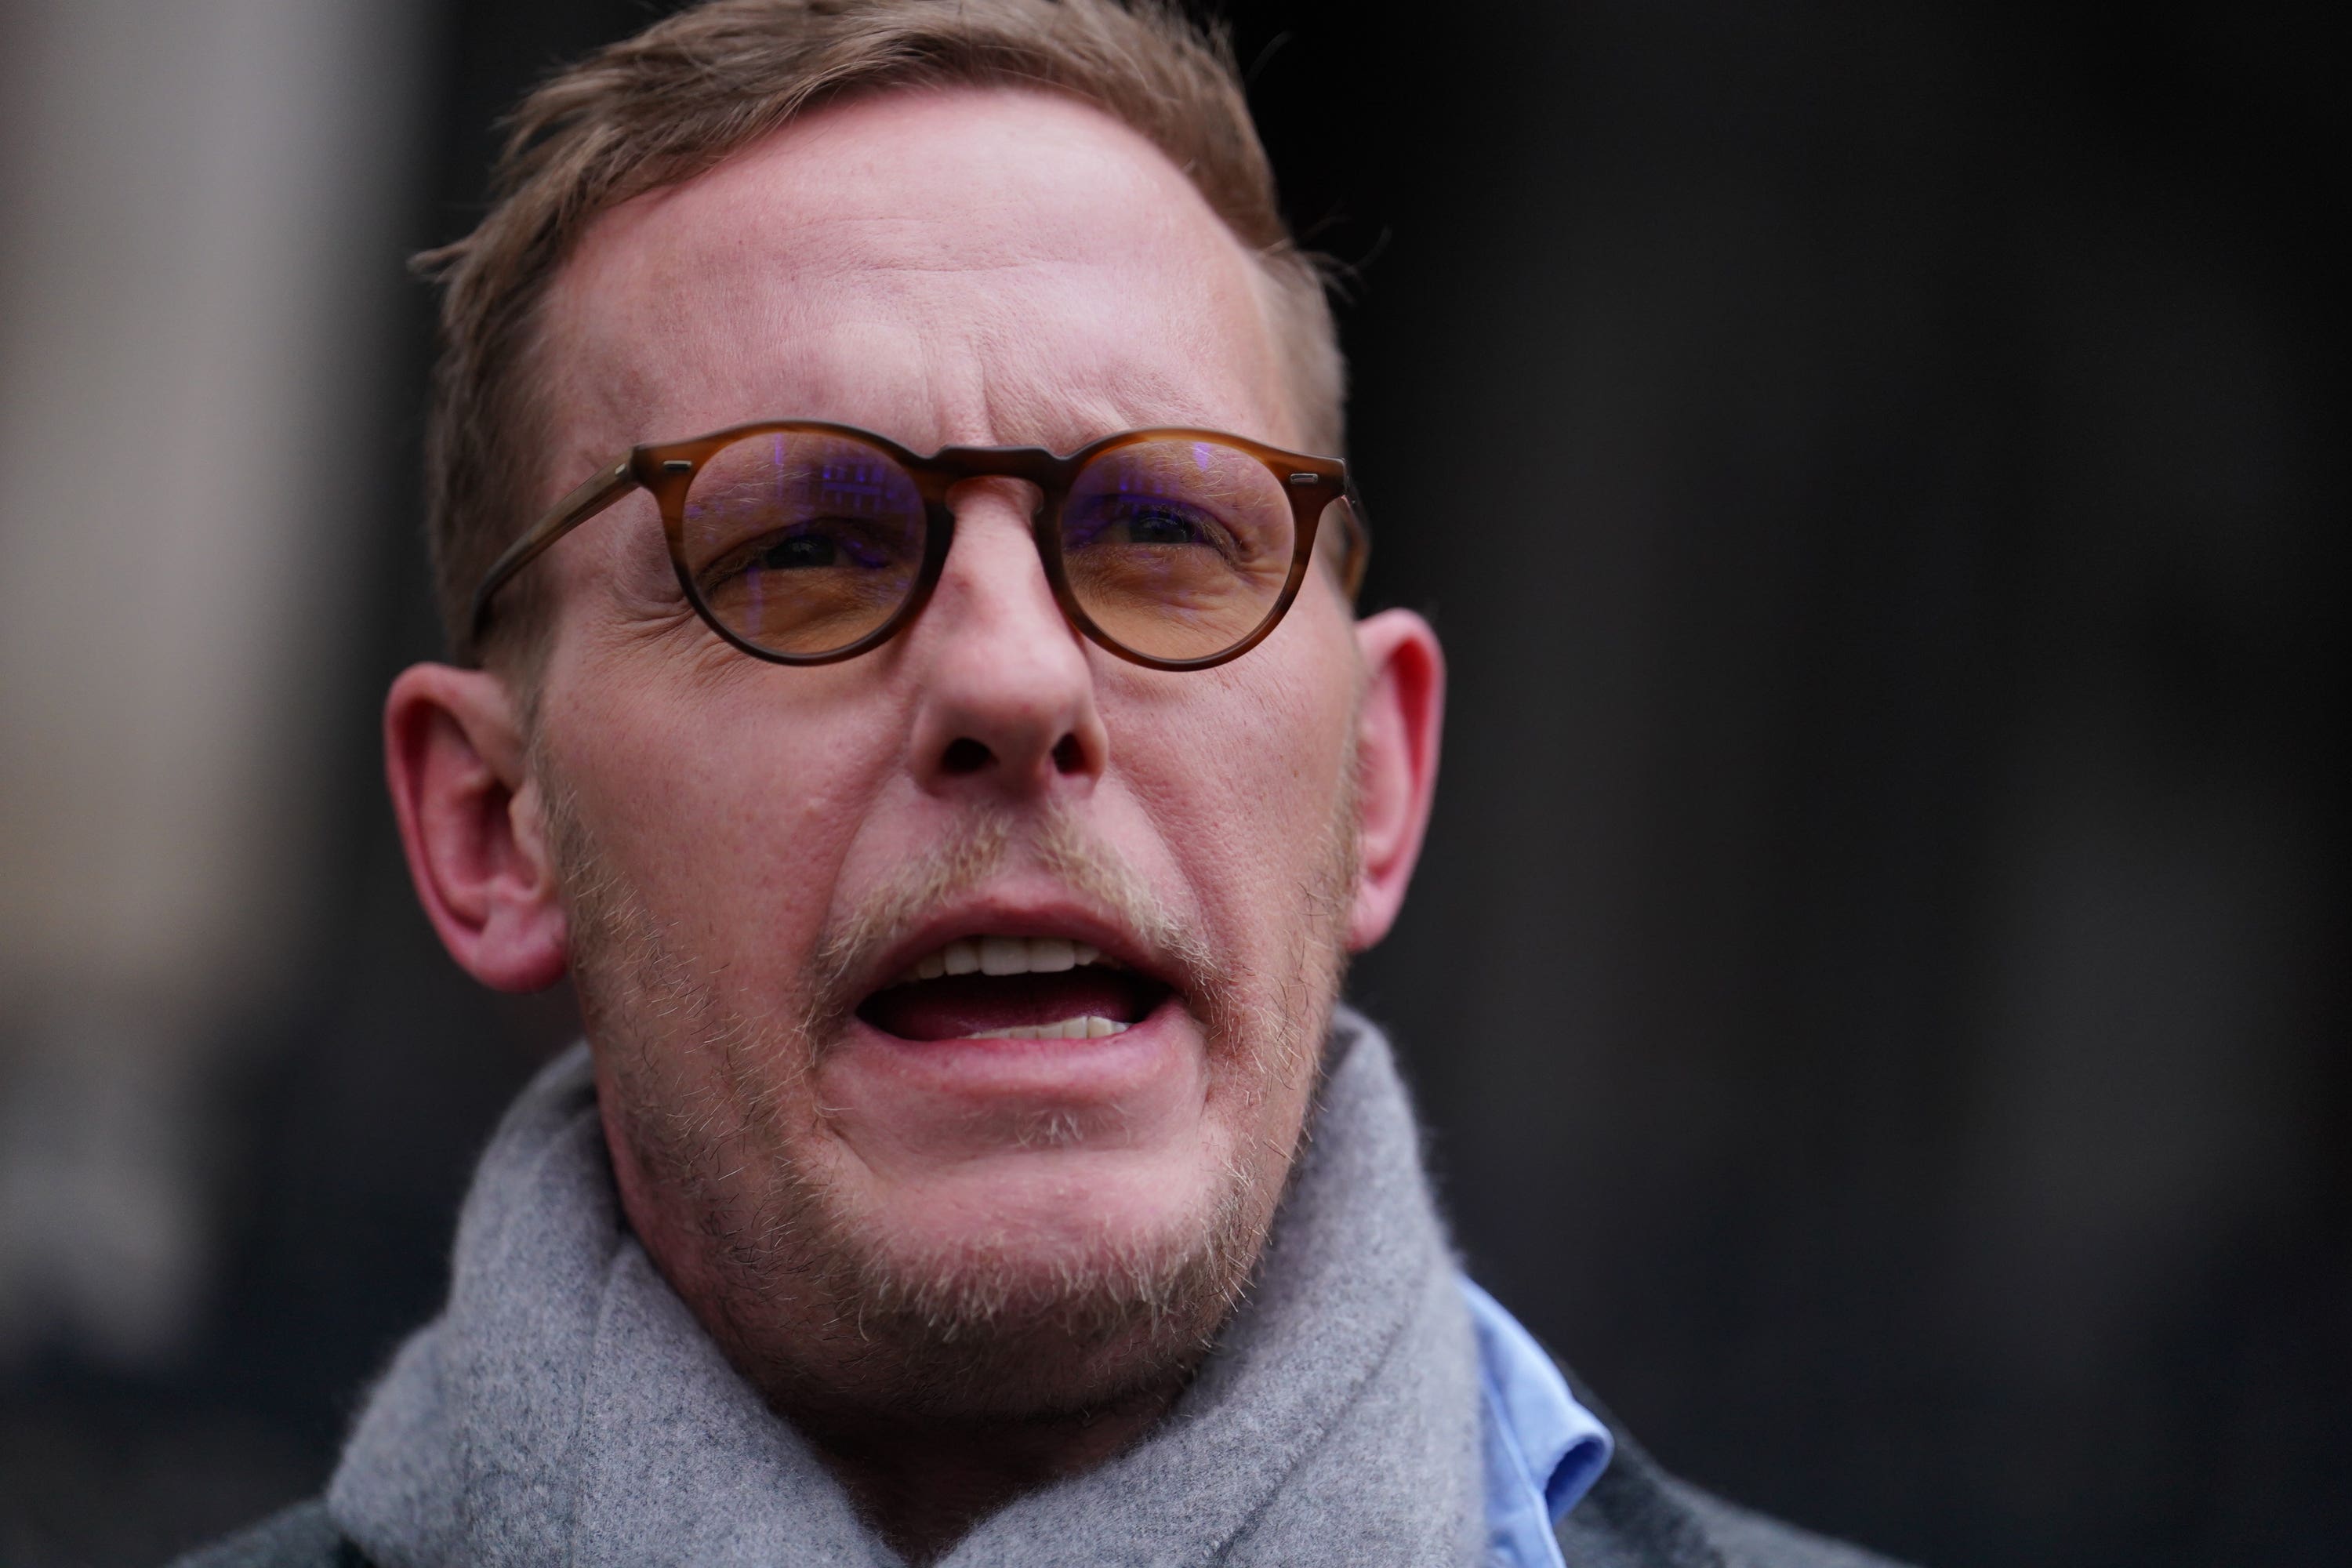 laurence fox loses deposit after failing to become london assembly member